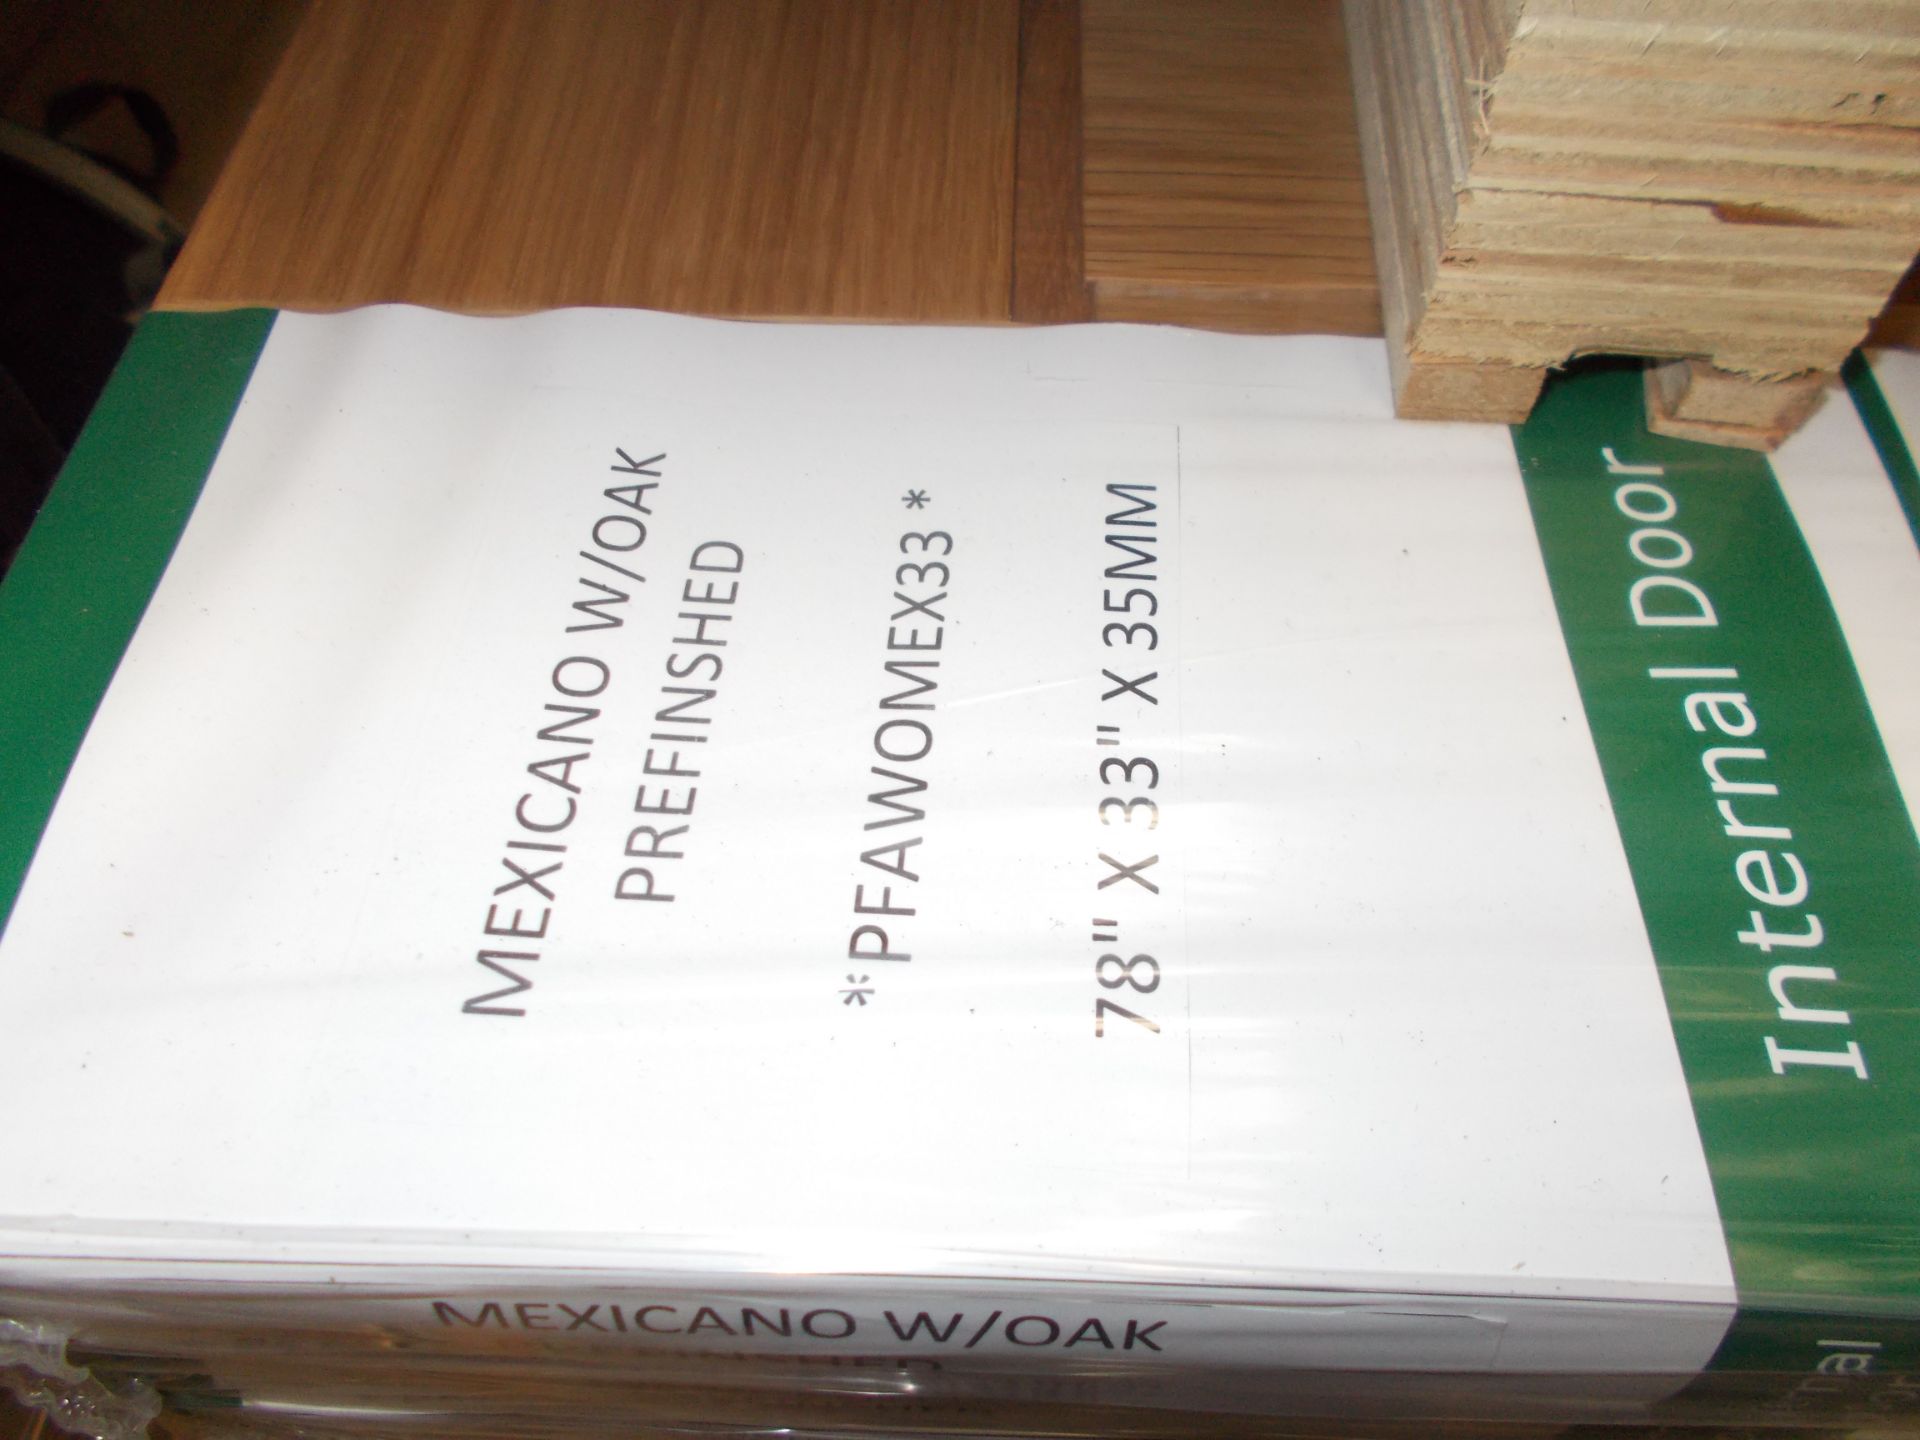 6 x Mexicano White Oak Prefinished PFAWOMEX33 Int Door 78”x33”x35mm - Lots to be handed out in order - Image 2 of 3